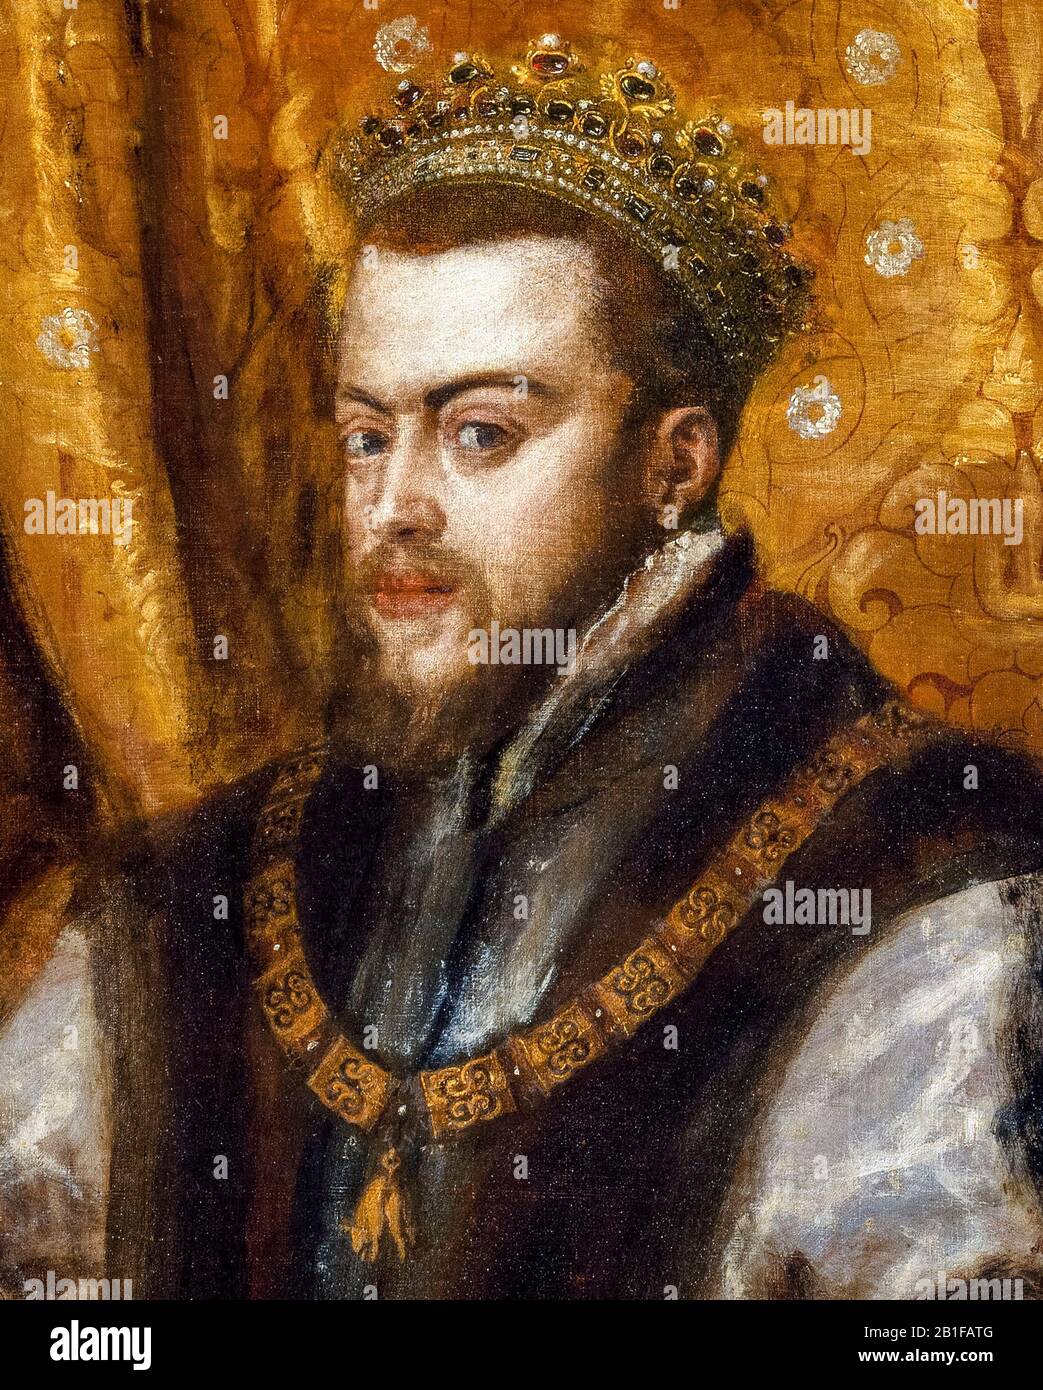 King Philip II of Spain (1527-1598), portrait painting detail by Titian, 1545-1556 Stock Photo